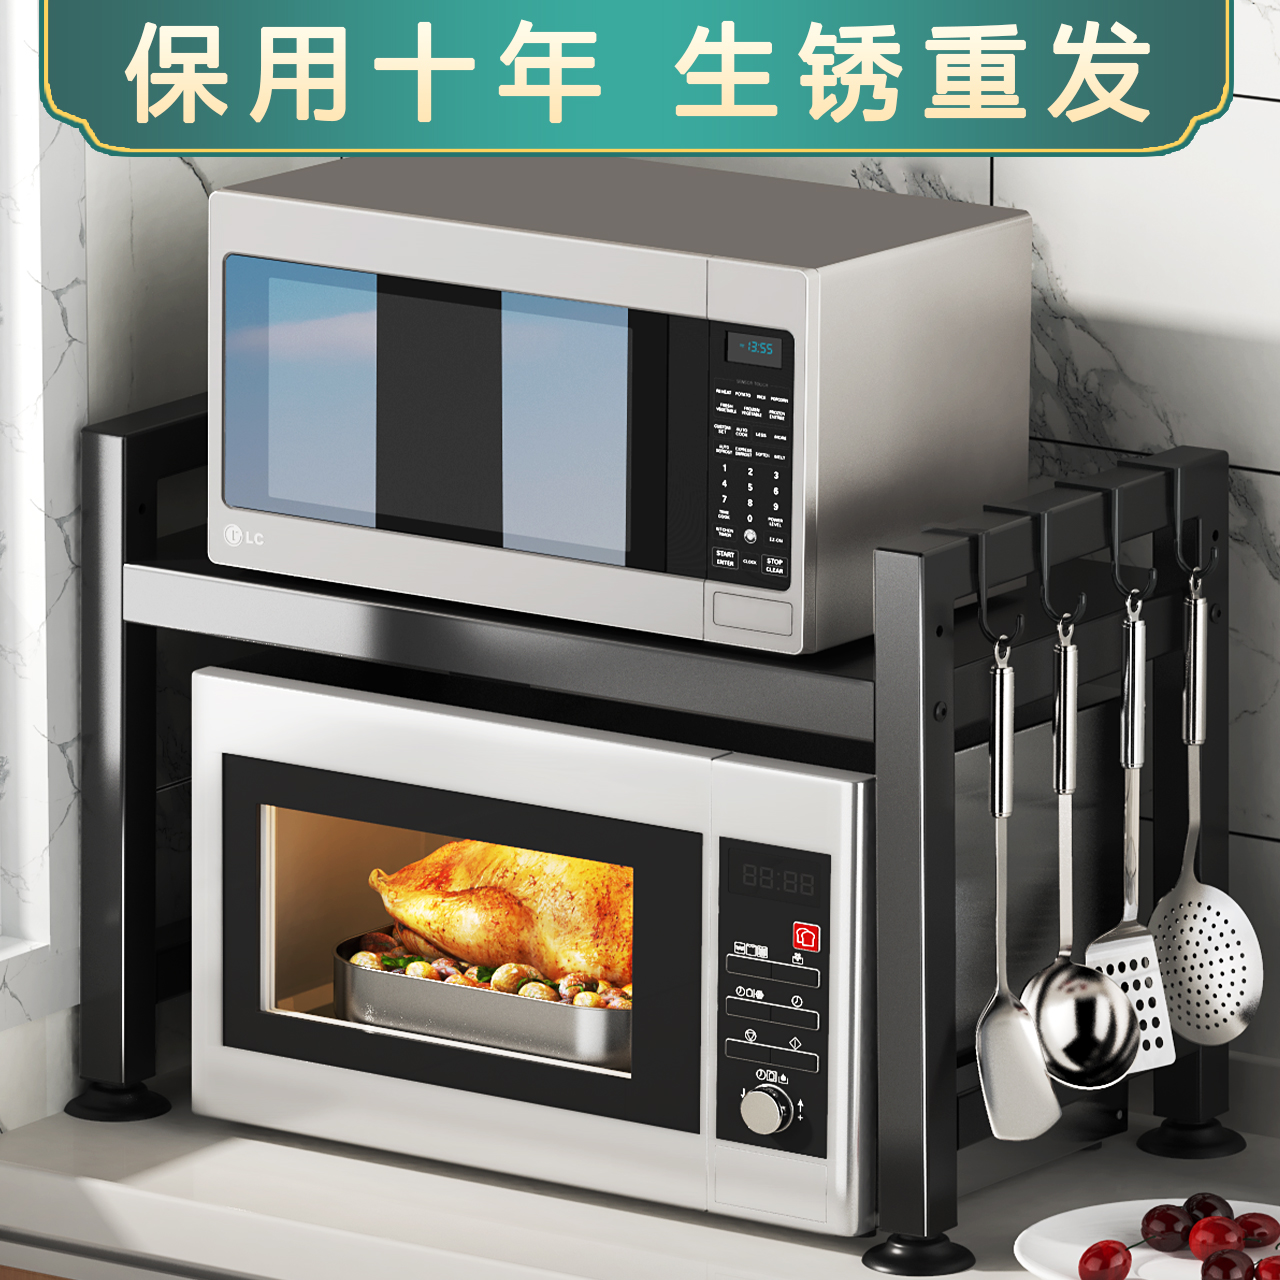 Retractable Kitchen Rack Microwave Oven Rack Home Dual Layer Tabletop Rice Cooker Storage Holder